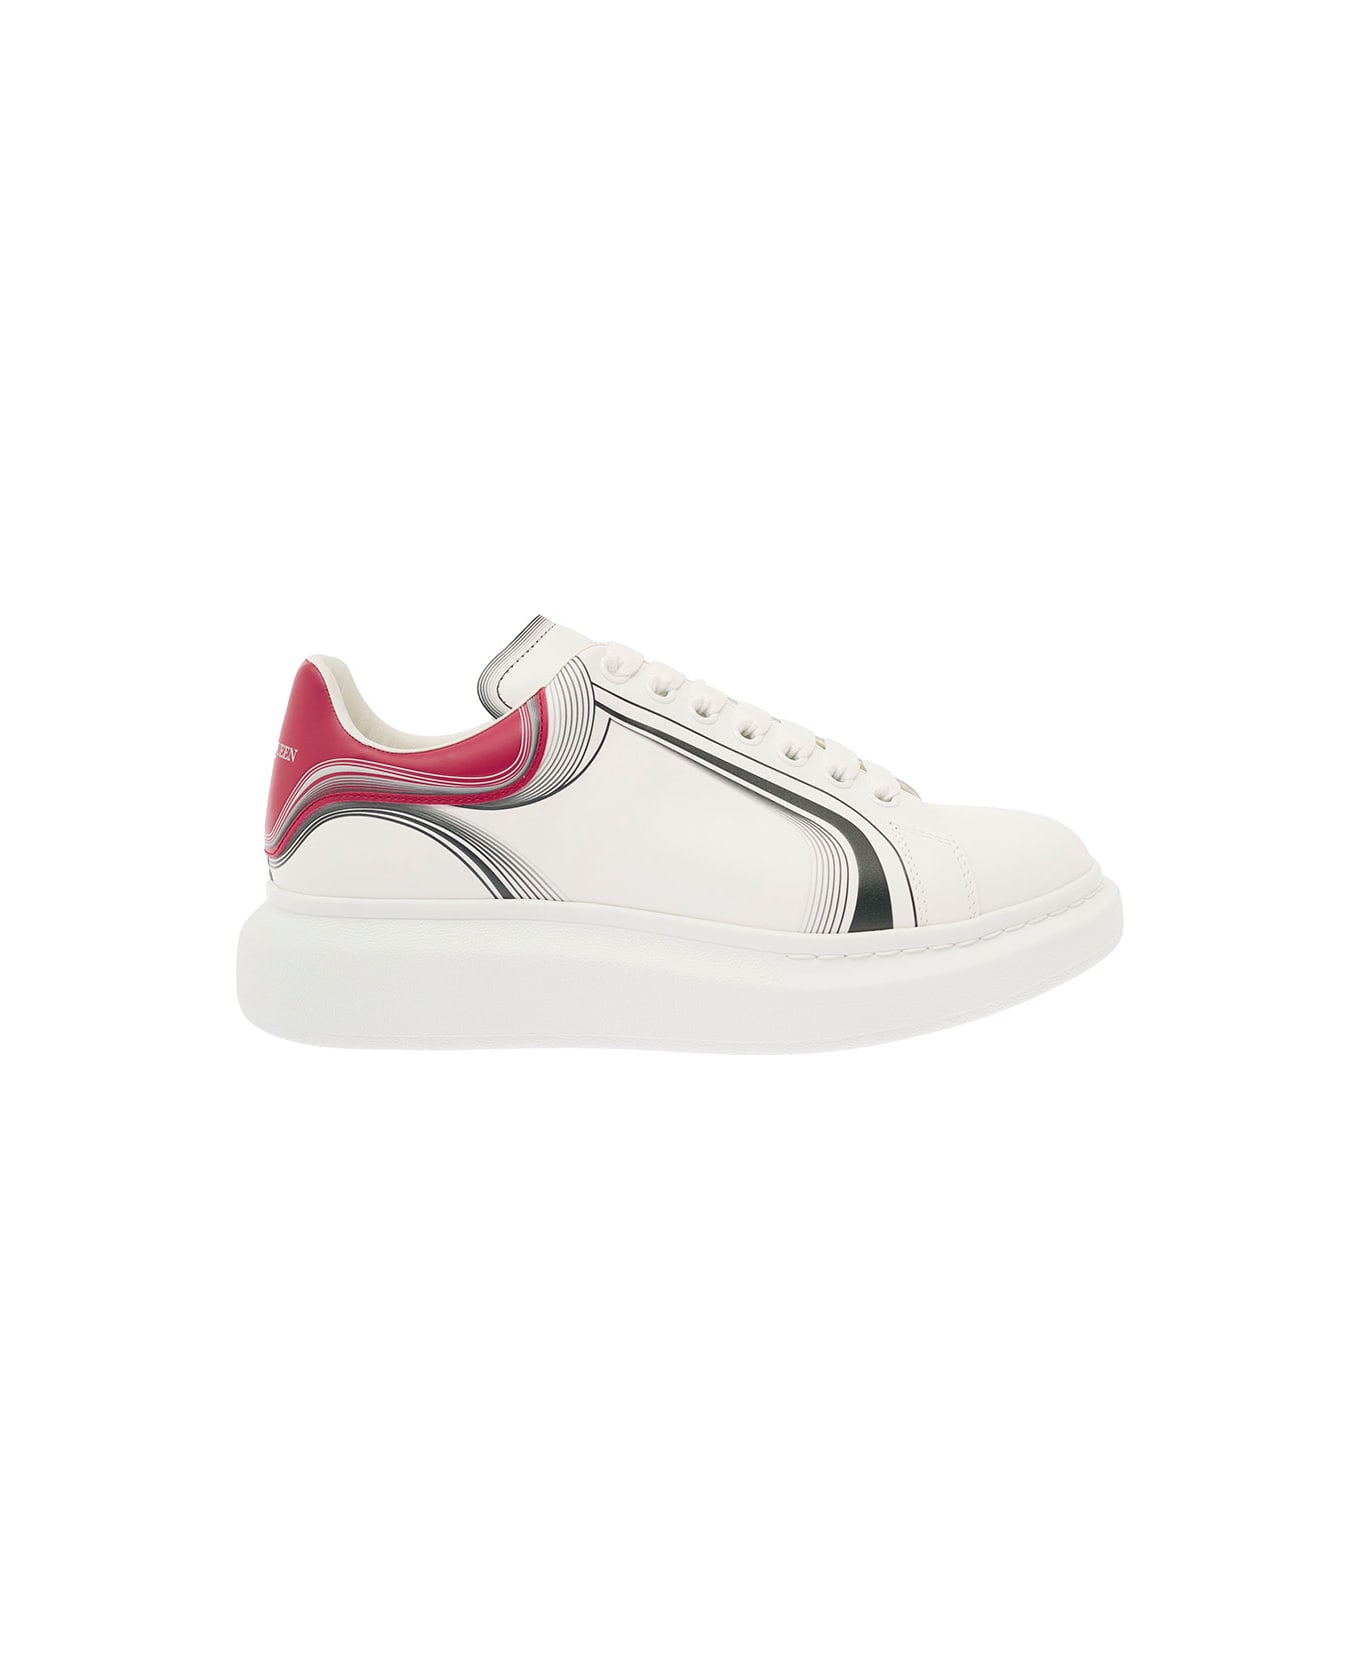 Alexander McQueen Sneakers With Oversized Sole And Graphic Details - Bianco